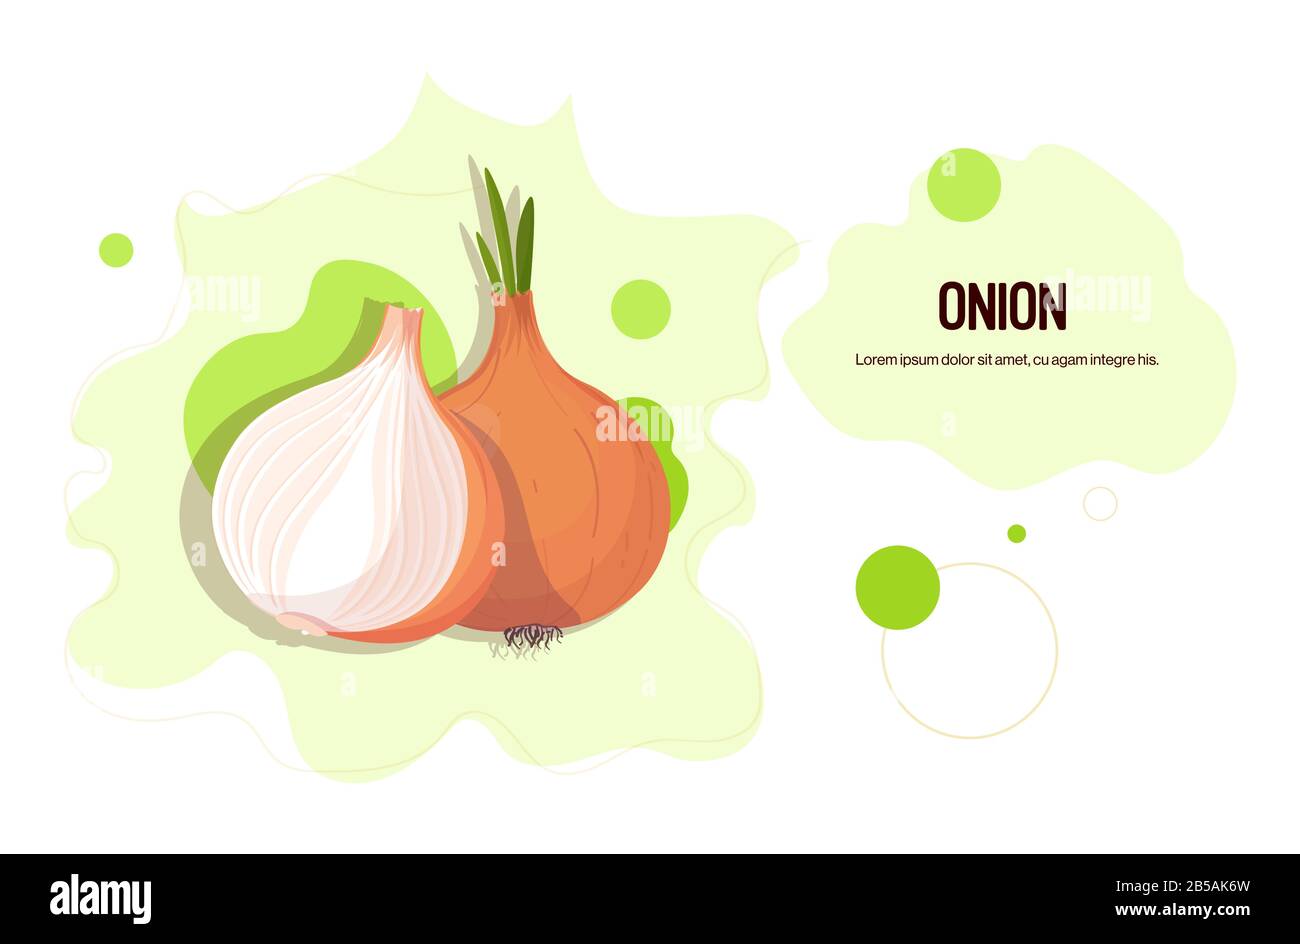 fresh onion sticker tasty vegetable icon healthy food concept horizontal copy space vector illustration Stock Vector